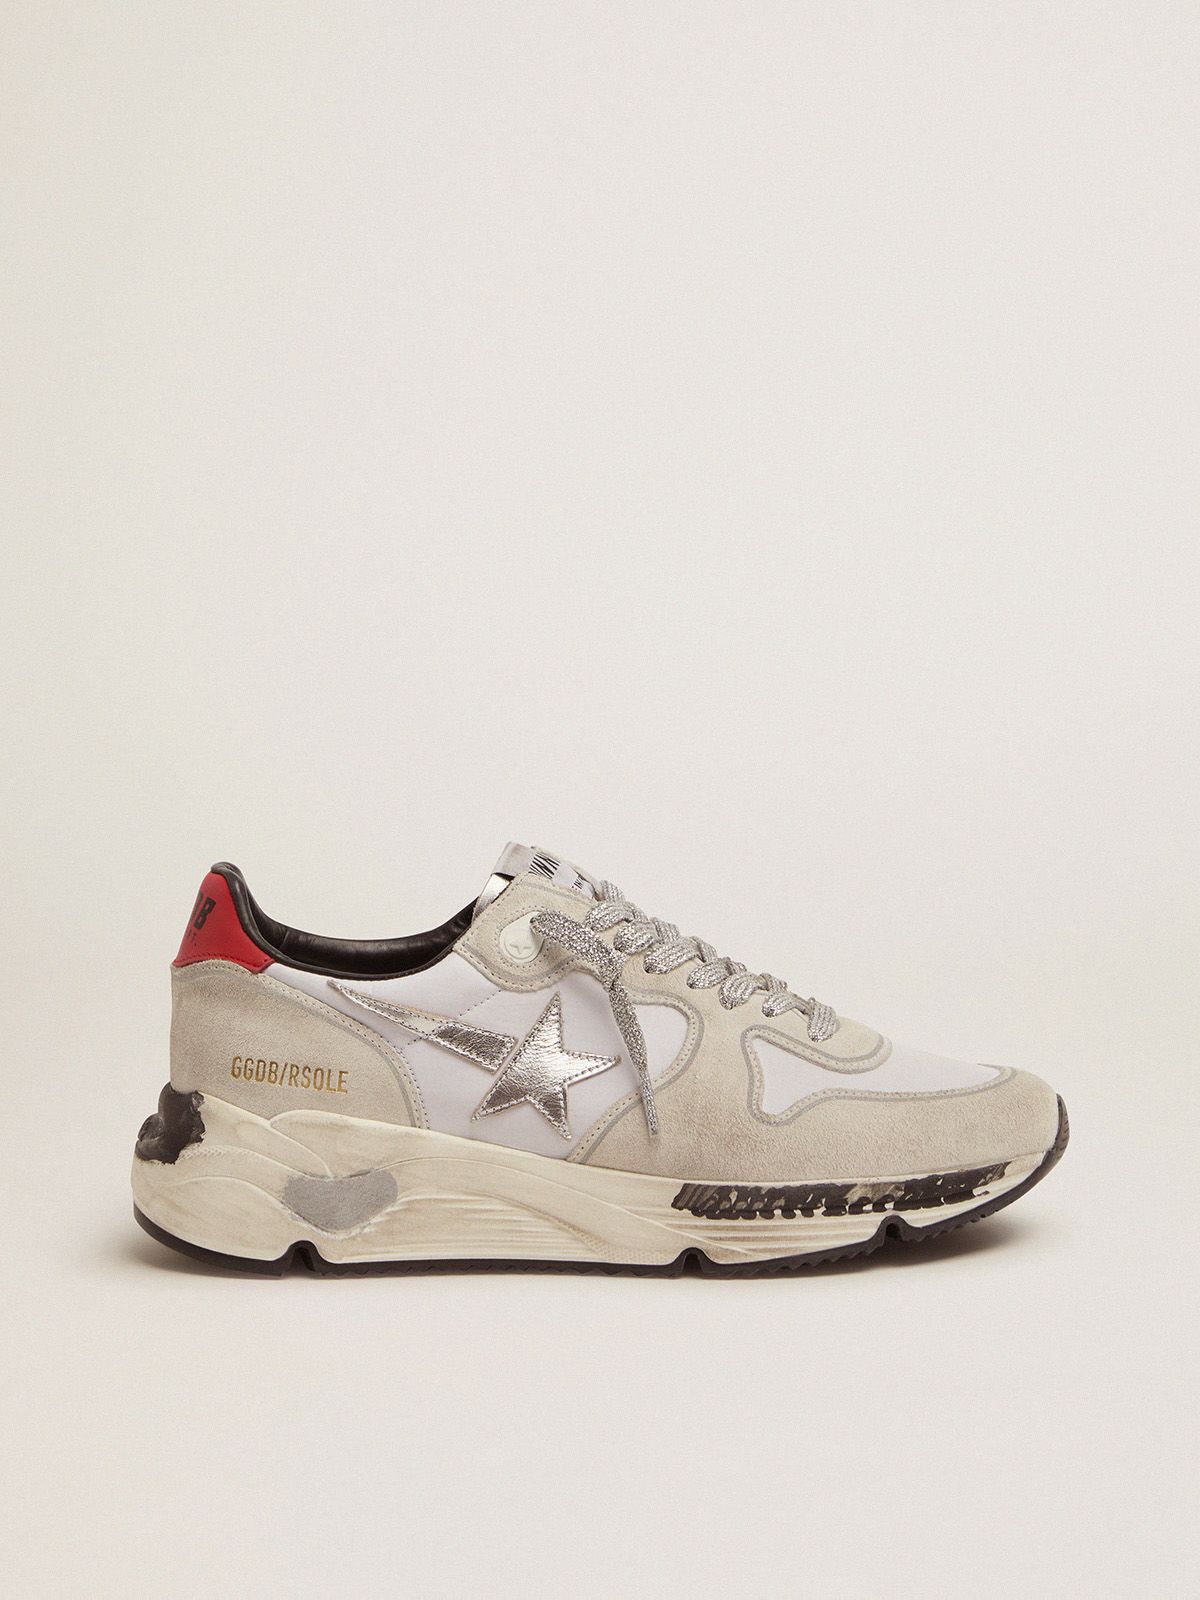 golden goose Running heel and sneakers star Sole tab silver red with